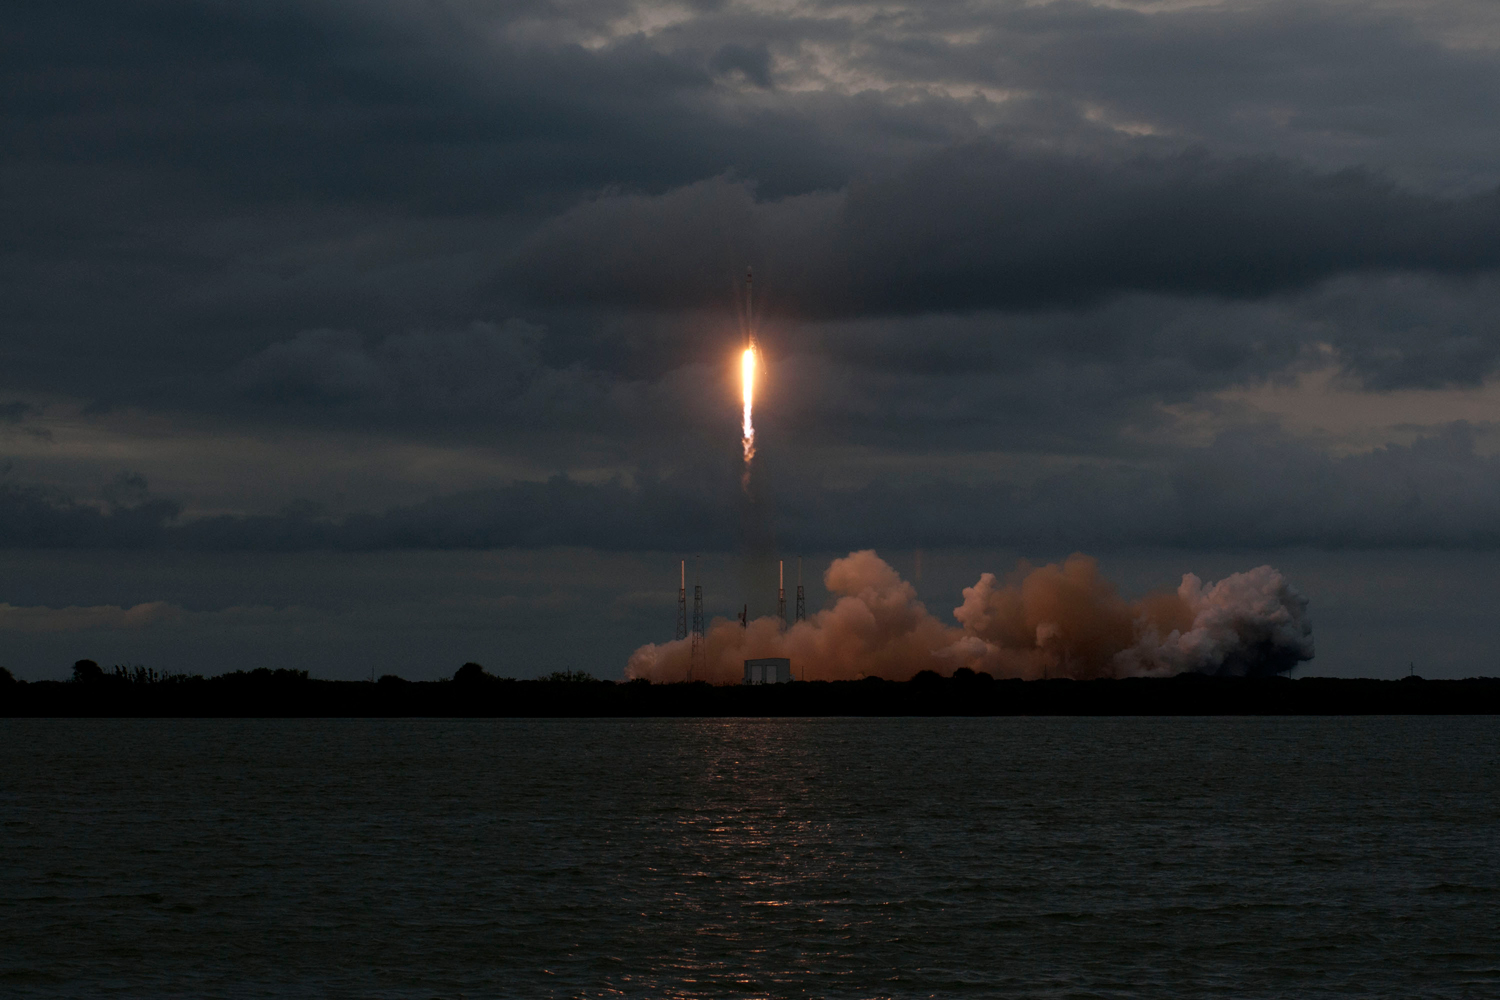 SpaceX's Falcon 9 launches with Thailand’s Thaicom 6 satellite on Jan. 6, 2014 from Cape Canaveral’s Space Launch Complex-40 in Cape Canaveral, Fla.